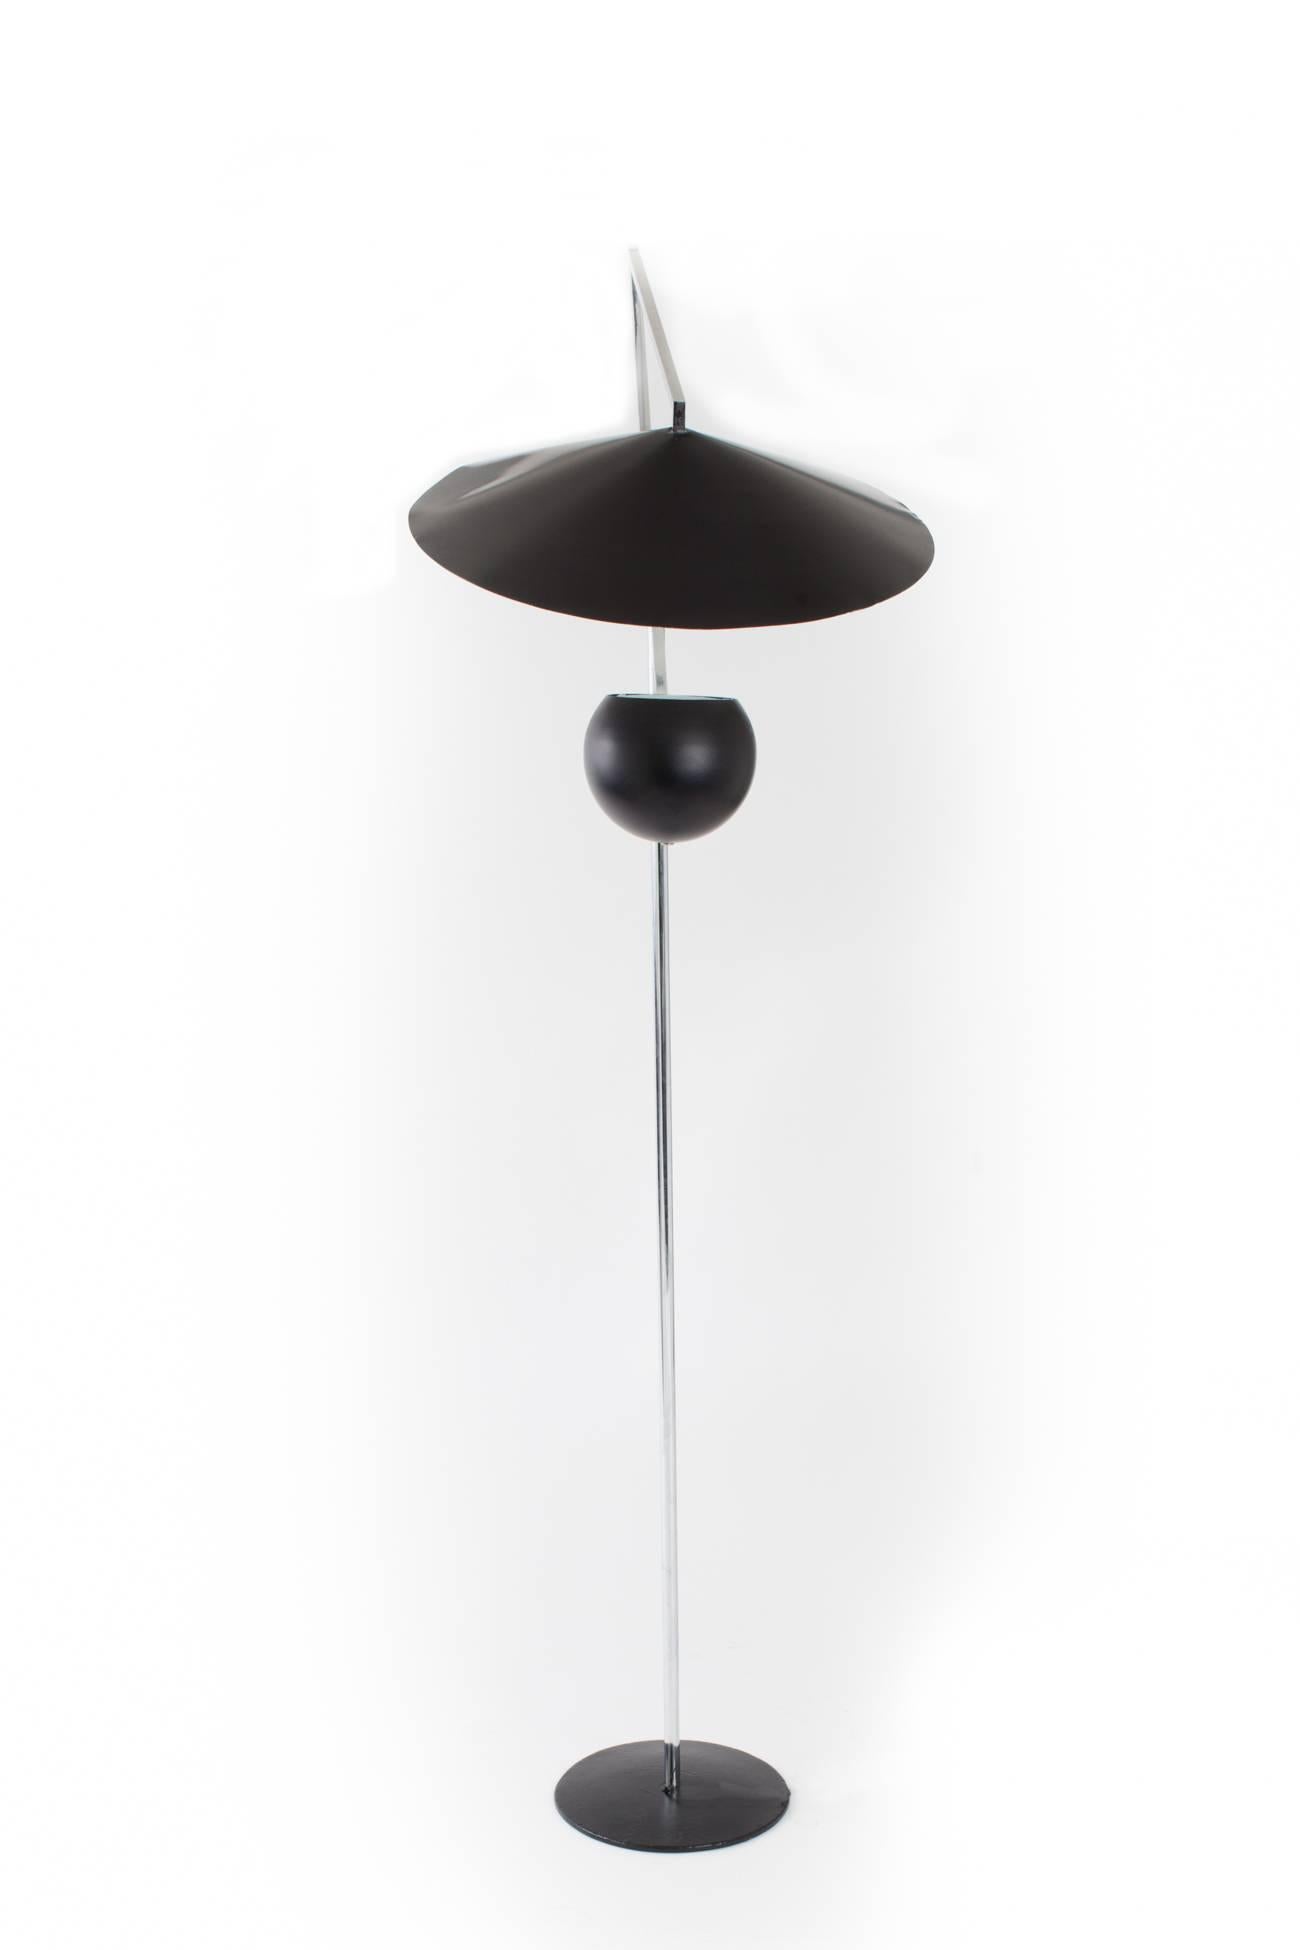 Mid-20th Century Architectural 1960s Articulated Floor Lamp by Robert Sonneman